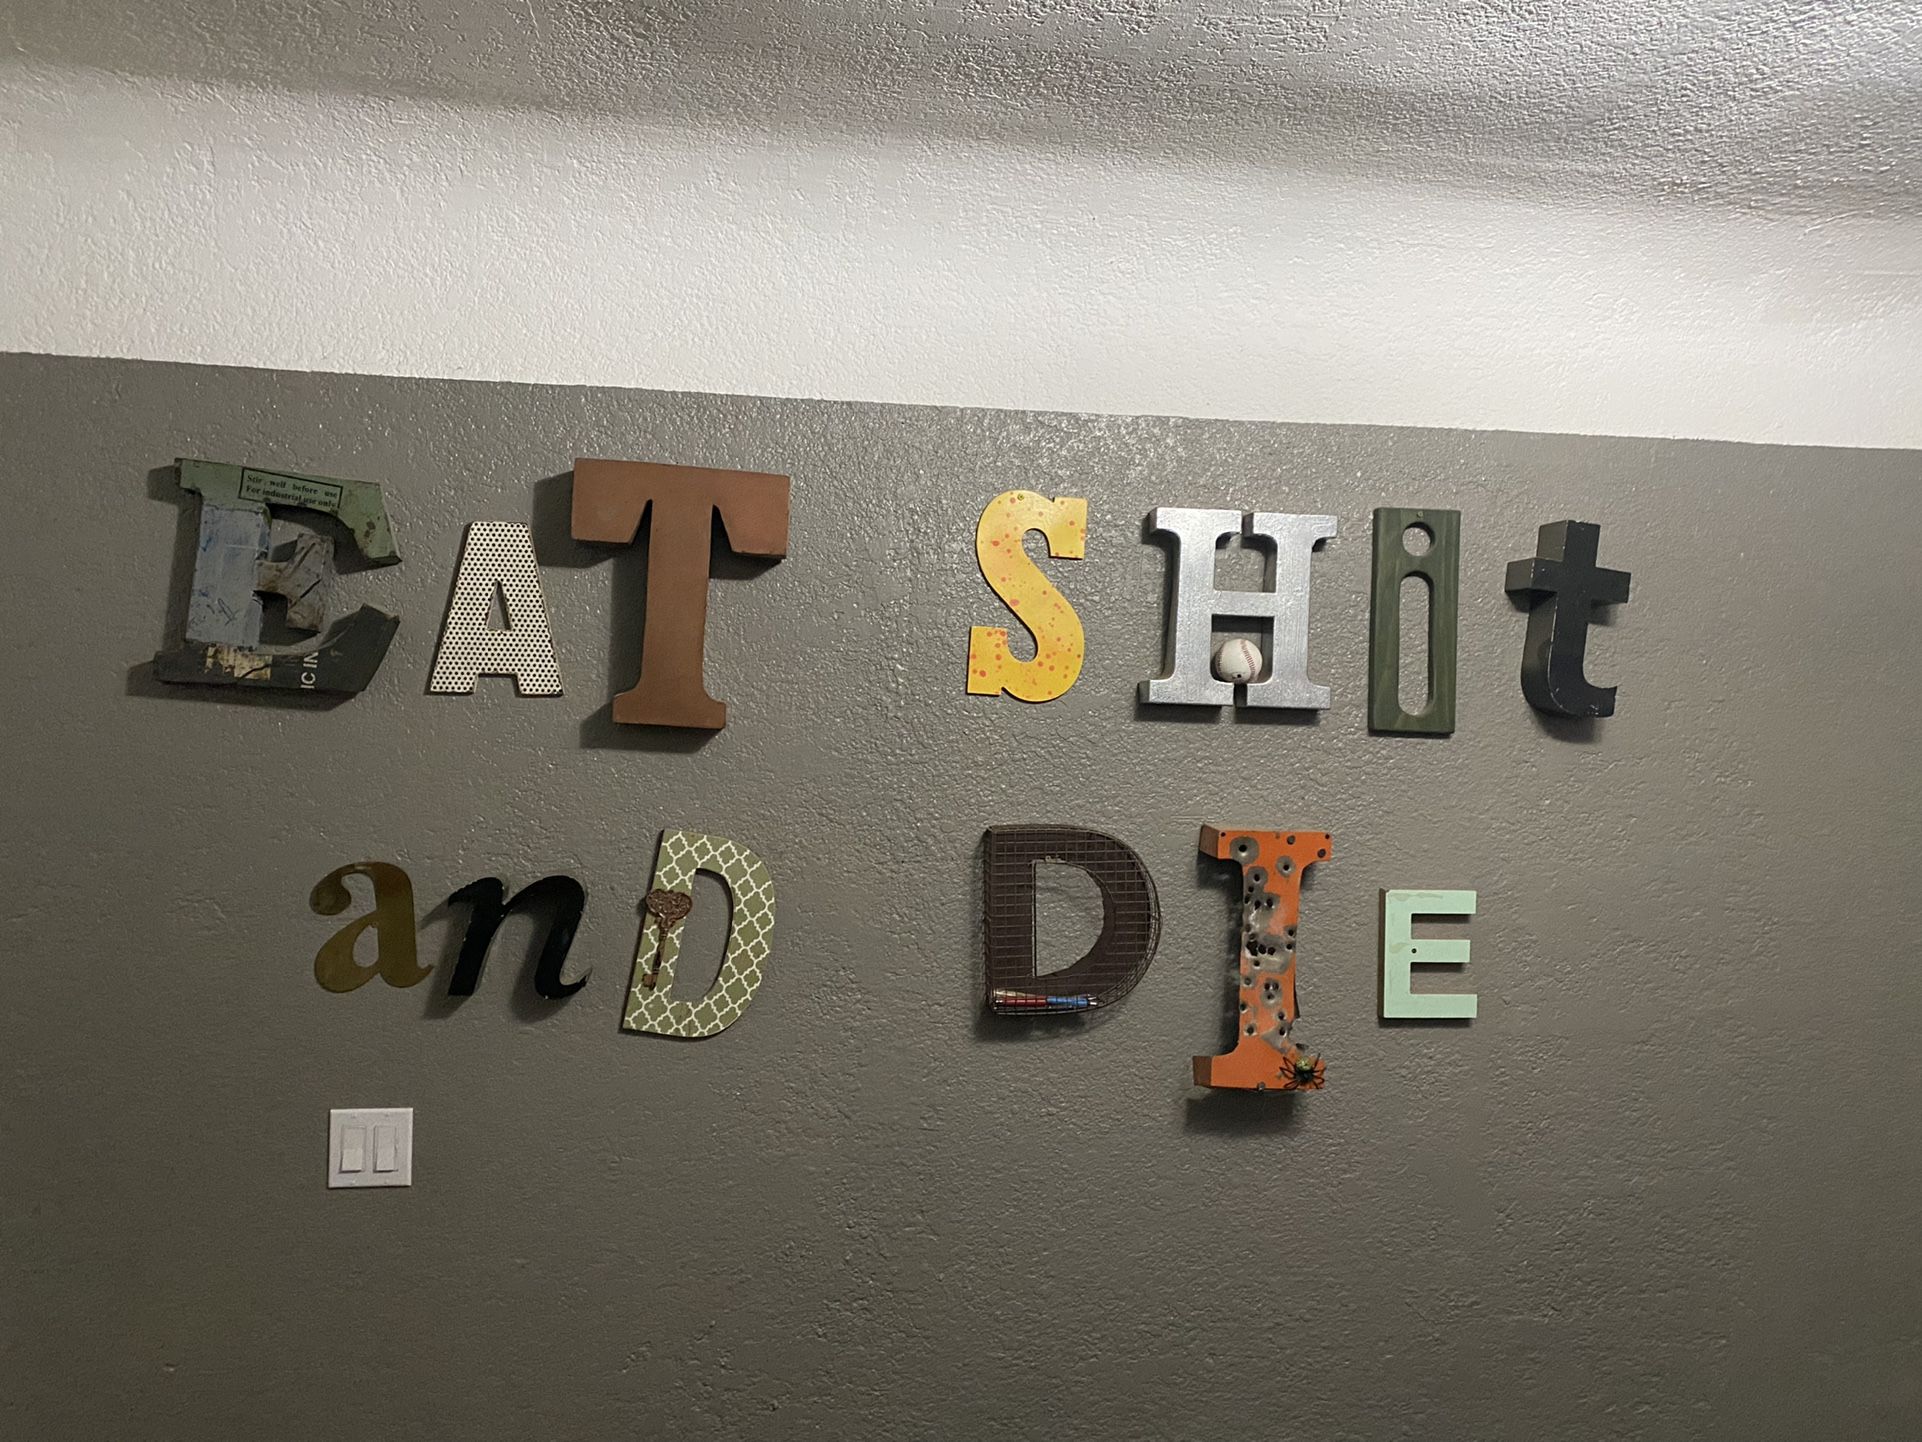 Metal Letters     “Eat Shit And Die”